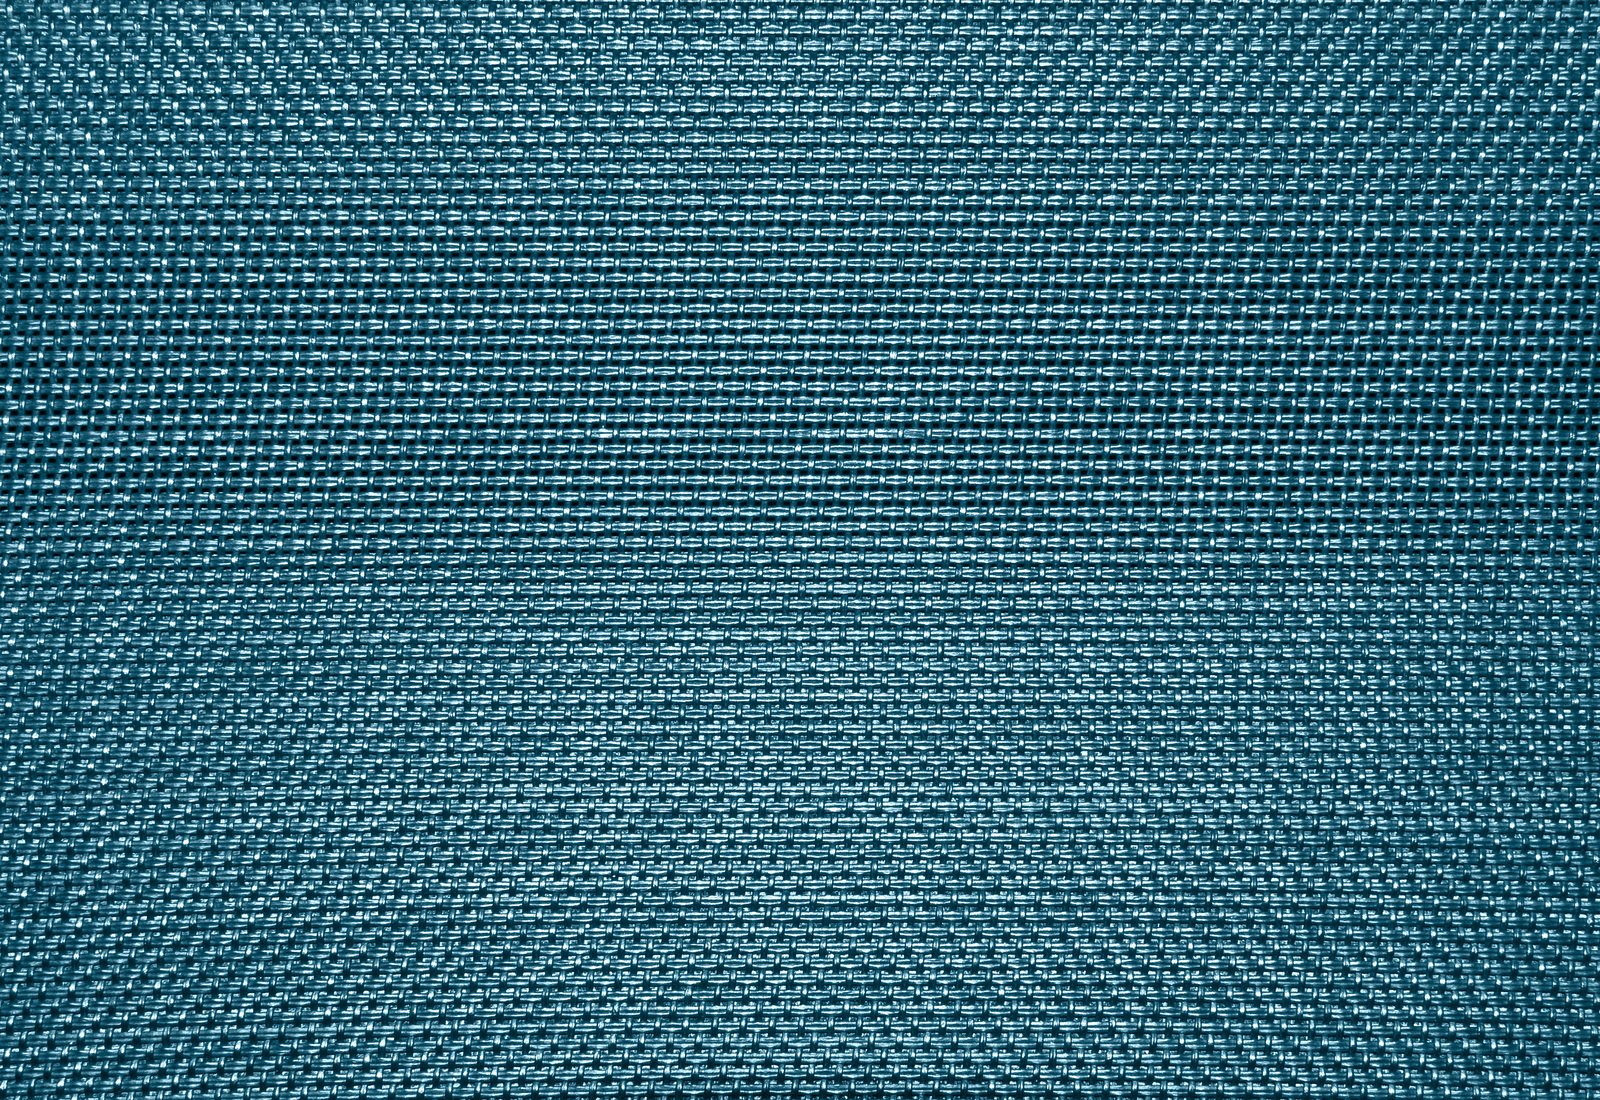 the blue fabric has small squares on it